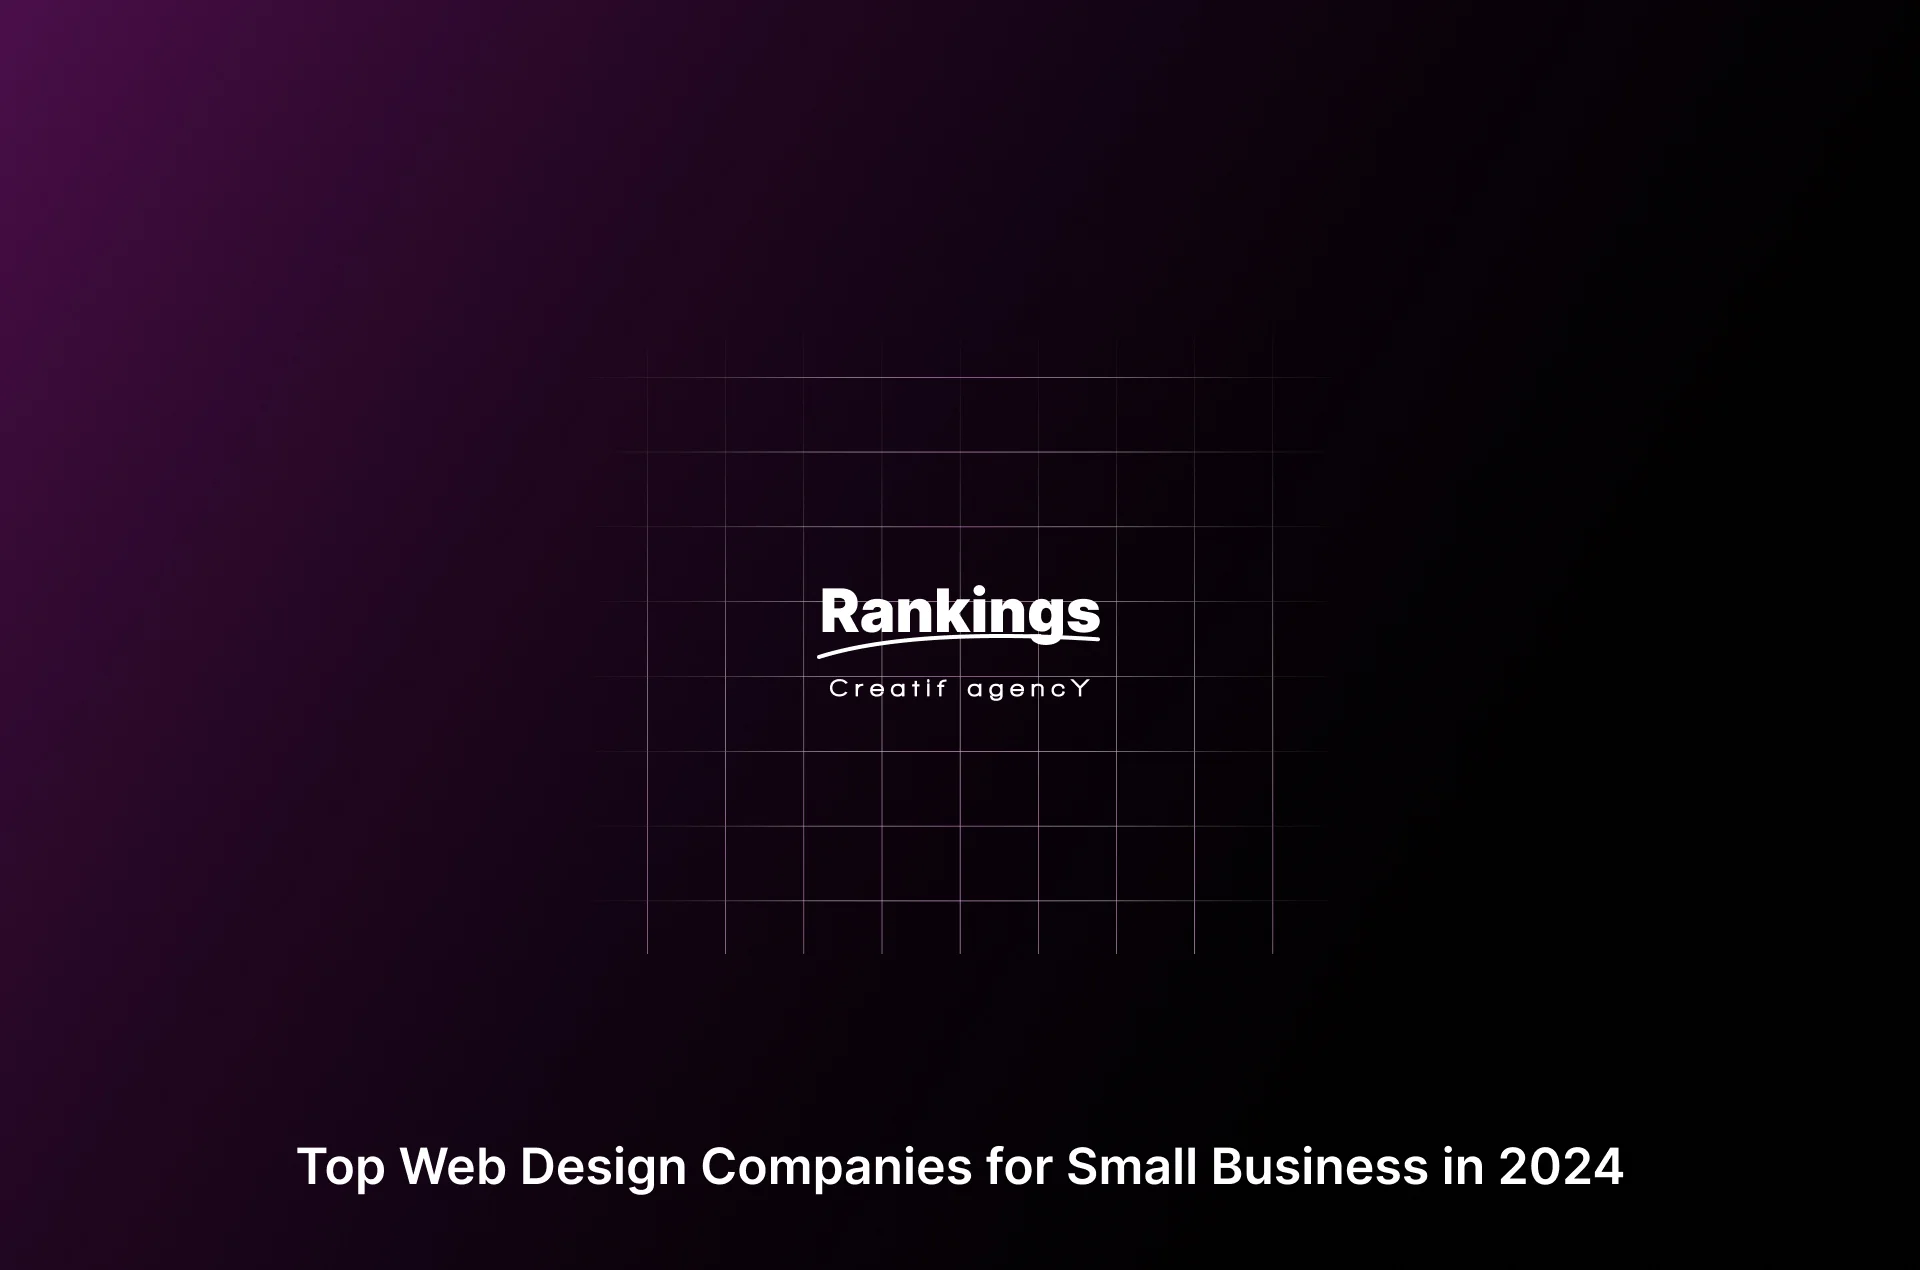 Top Web Design Companies for Small Business in 2024